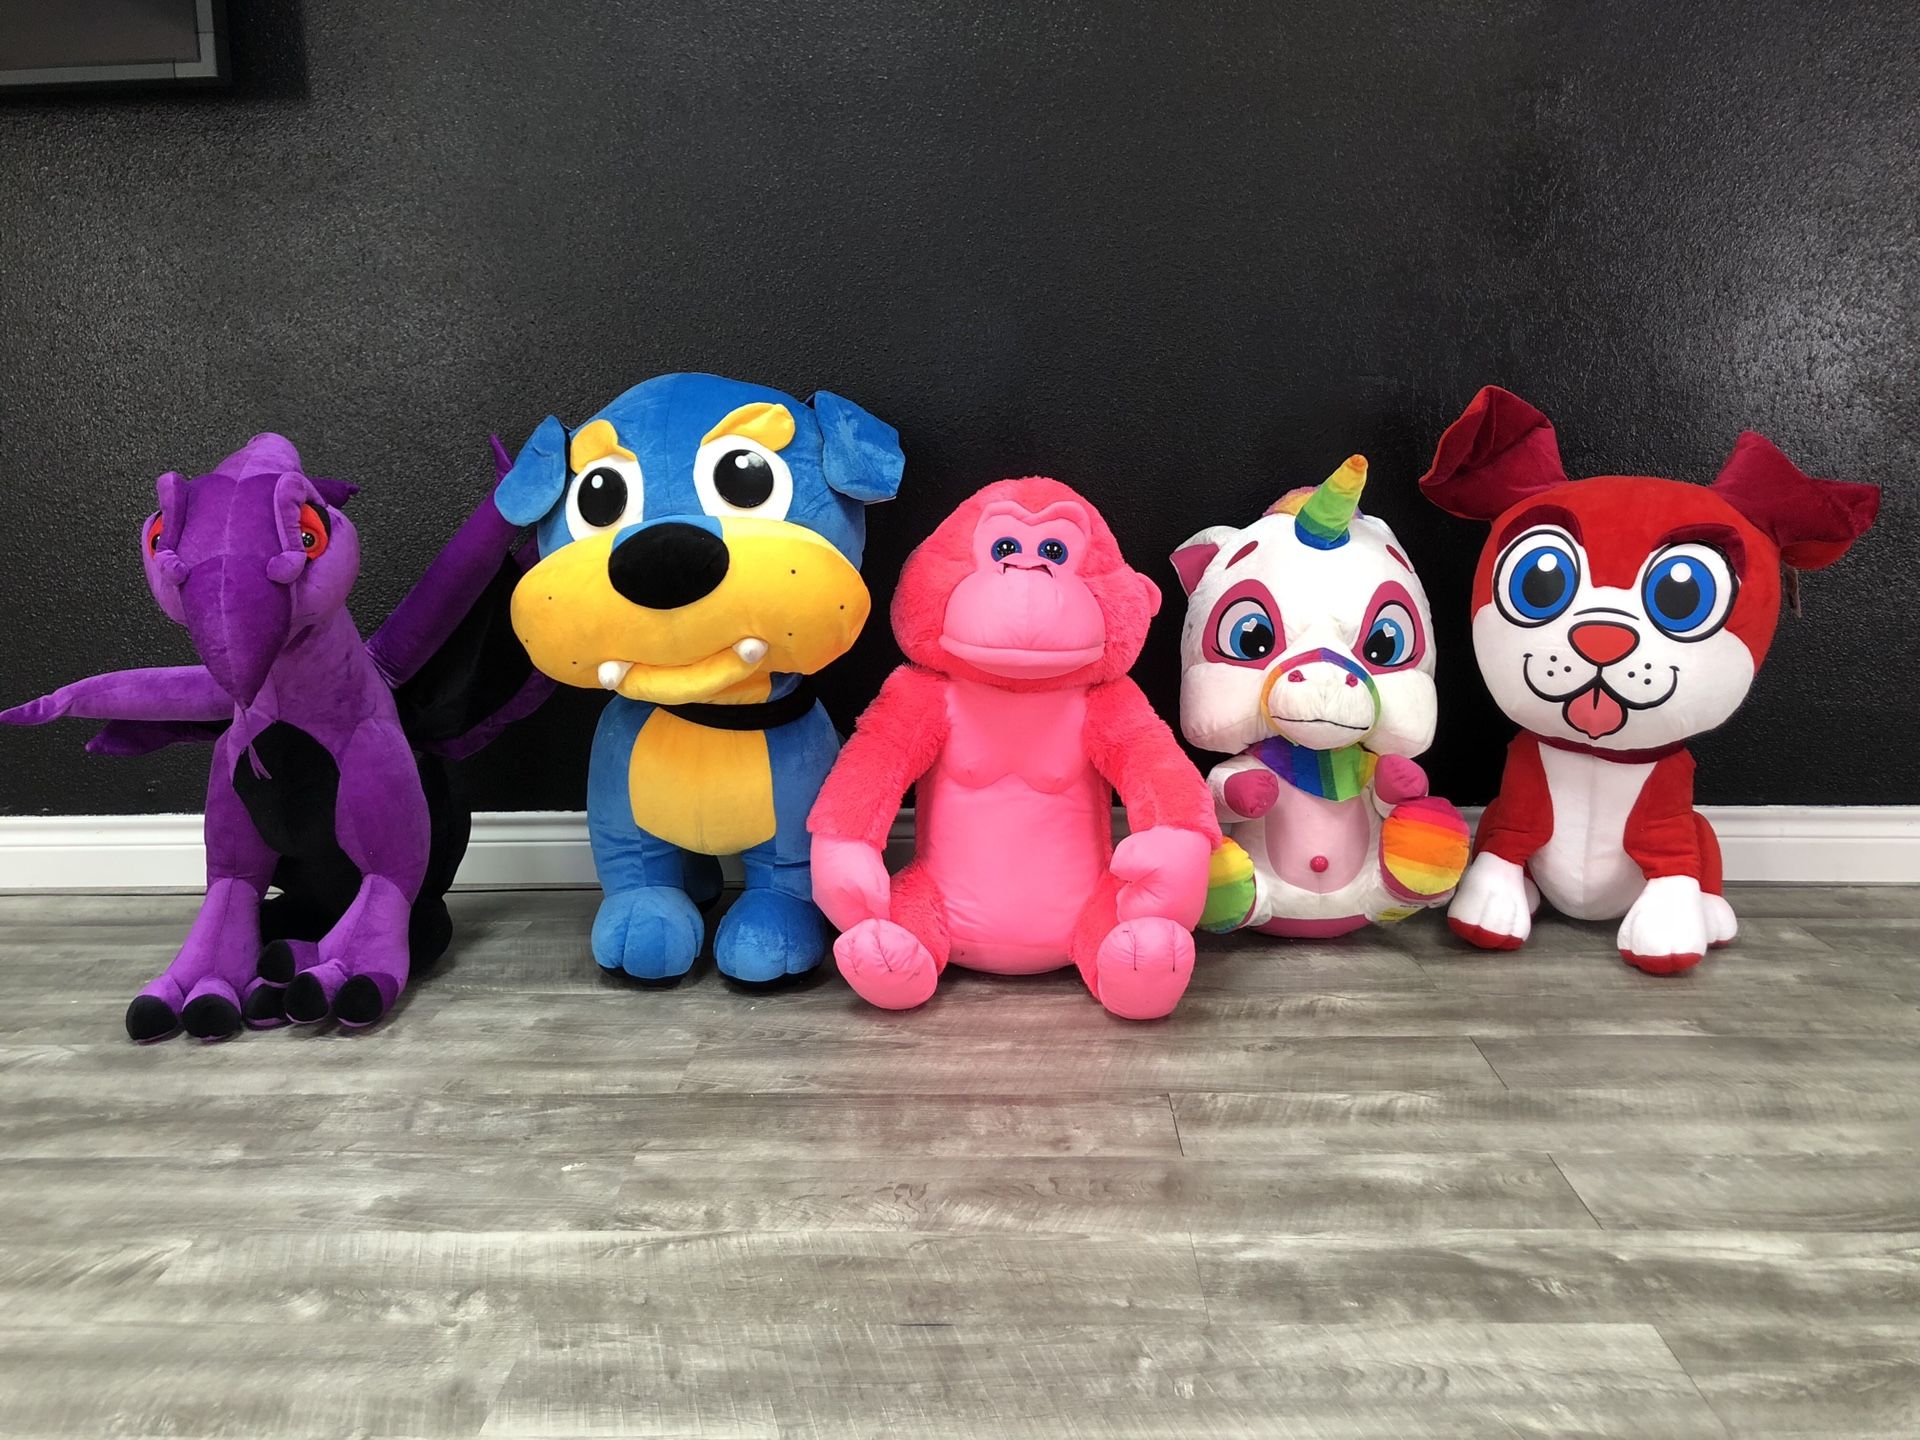 2.5 PALLETS OF ASSORTED BIG STUFFED PLUSHIES!! KIDS LOVE THESE!!! $3,450 RETAIL VALUE $500 TAKE ALL BULK SALE ONLY